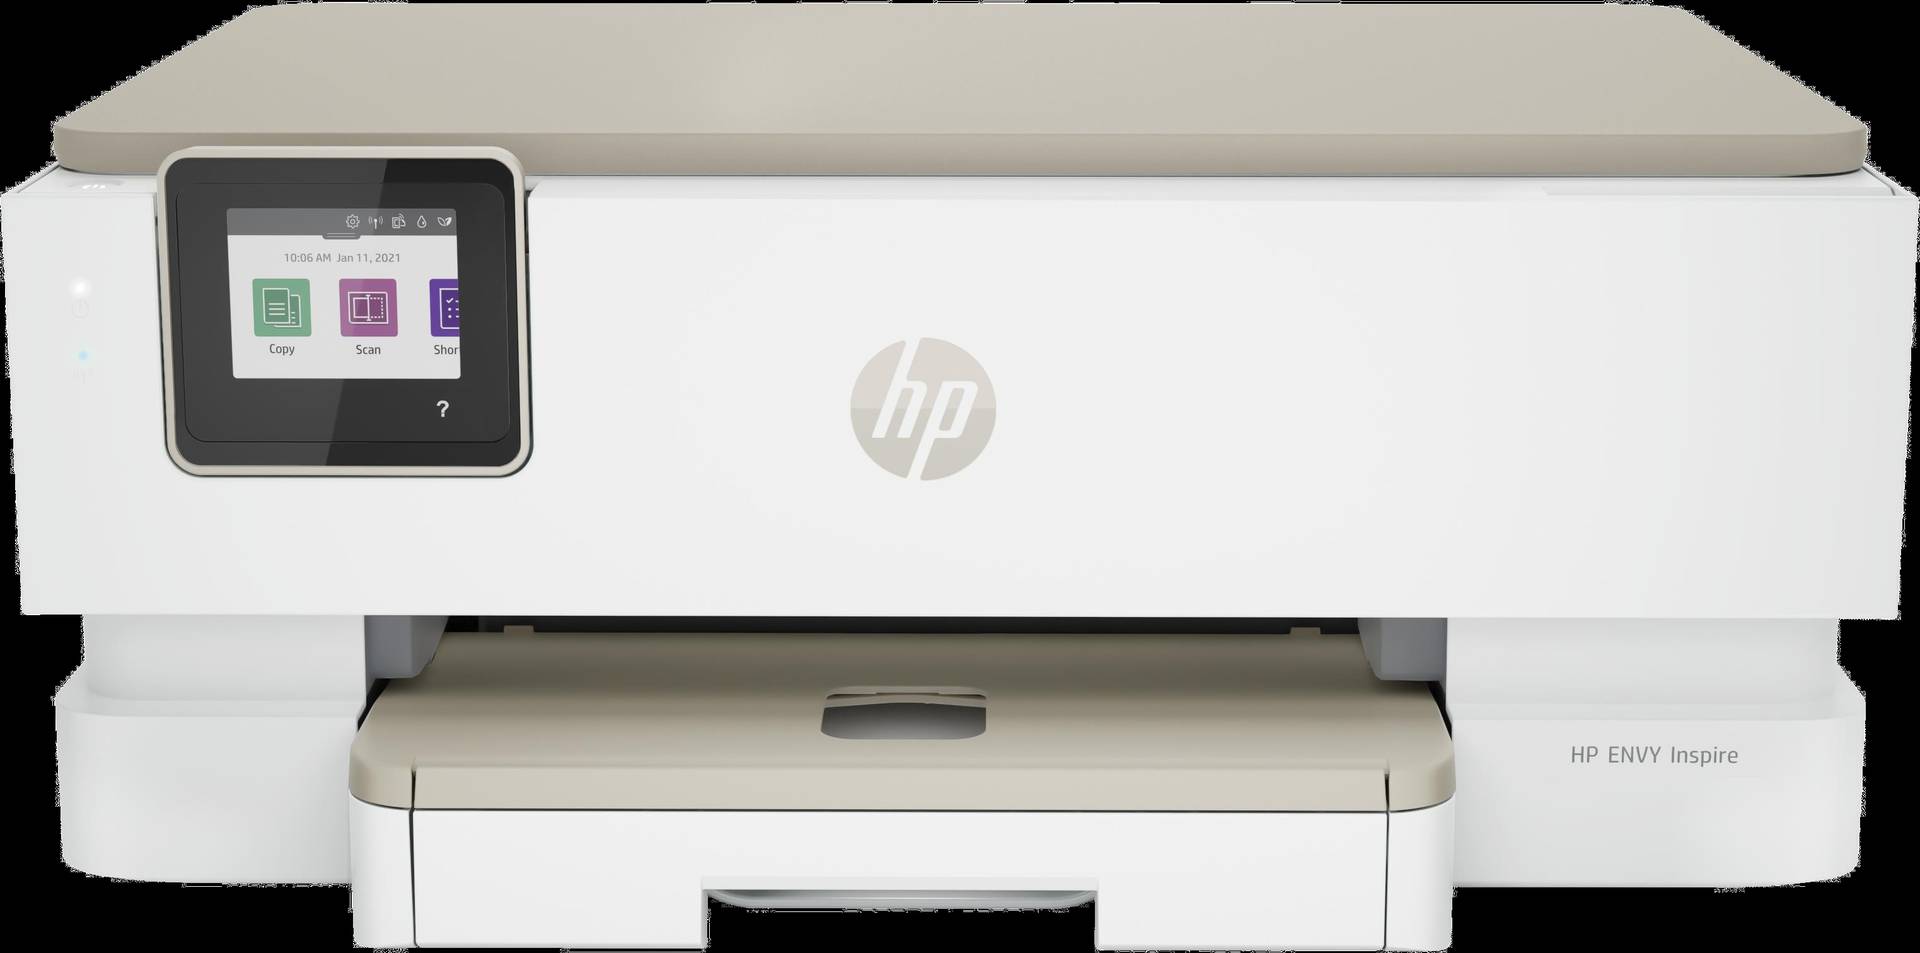 HP Envy Inspire 7220e All-in-One A4 Color Inkjet 10ppm Print Scan Copy Photo Printer (242P6B#629) von HP Inc